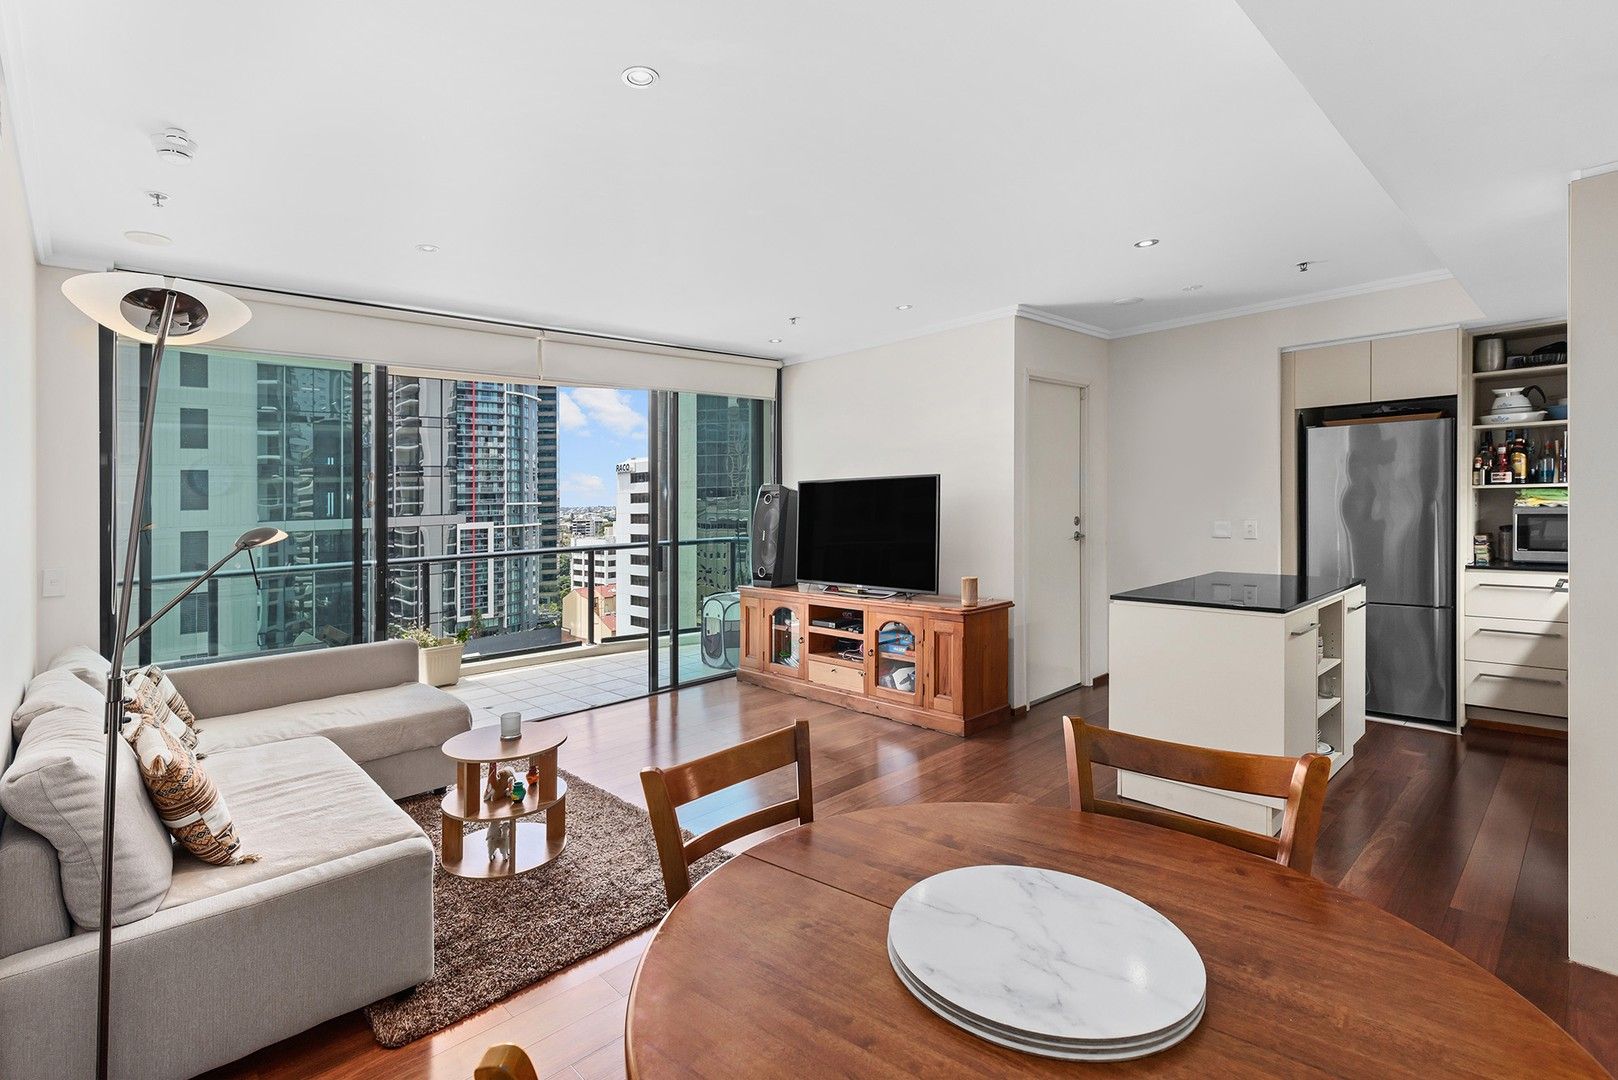 2 bedrooms Apartment / Unit / Flat in 1605/120 Mary Street BRISBANE CITY QLD, 4000